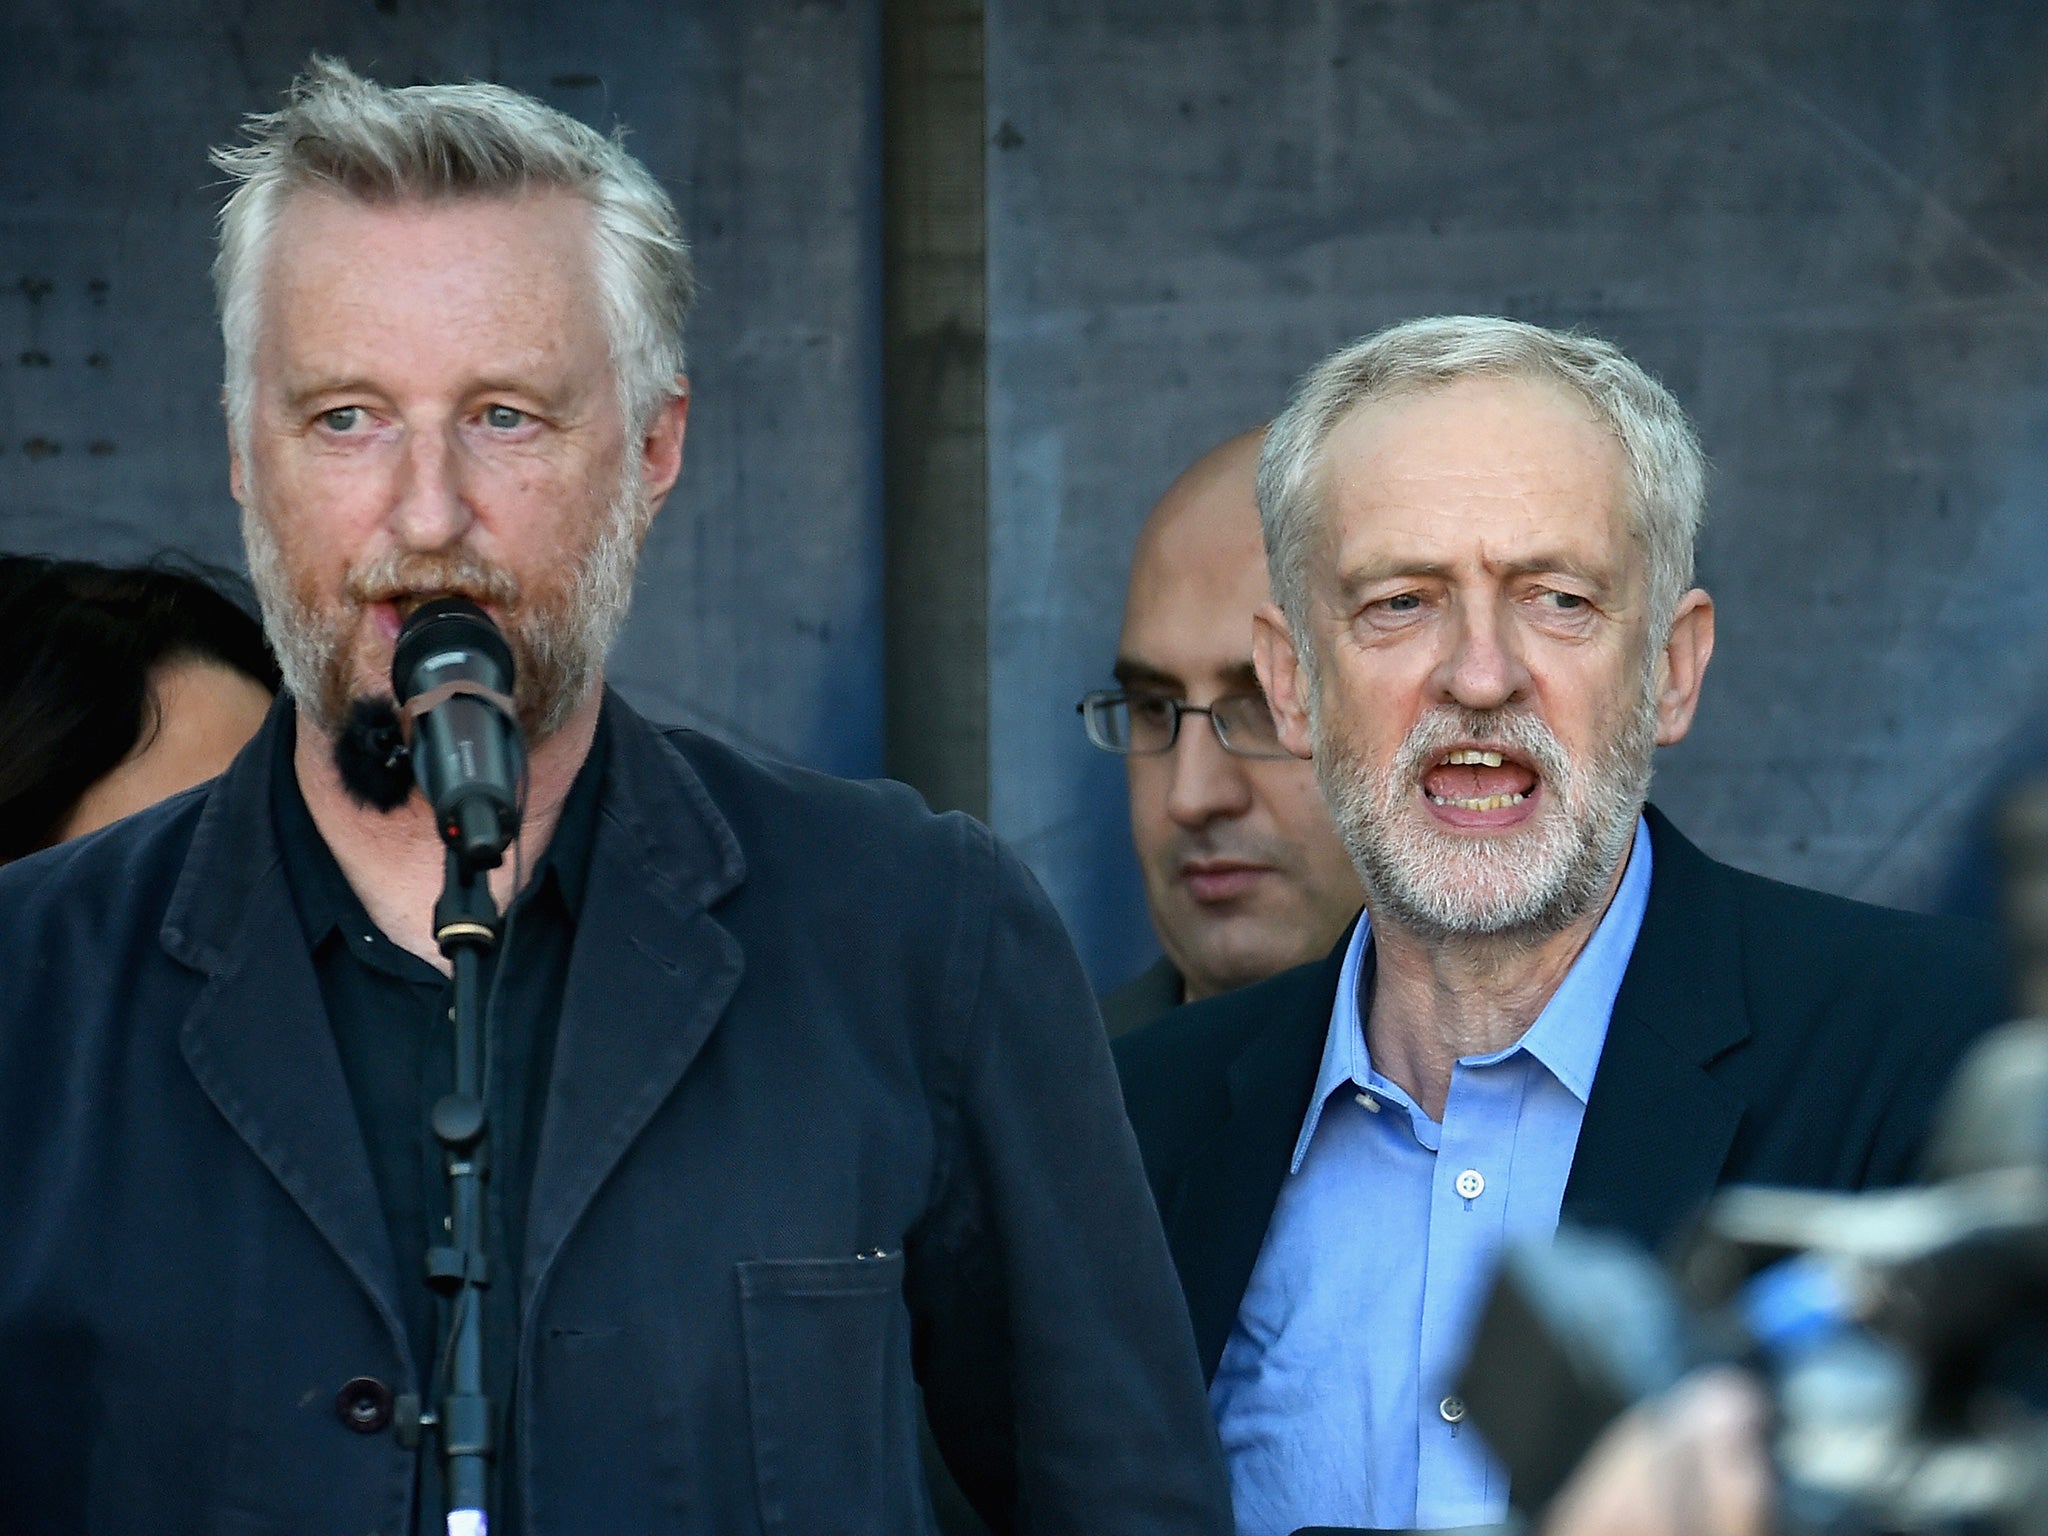 Jeremy Corbyn joins Billy Bragg in singing ‘The Red Flag’ at a rally in support of refugees last Saturday